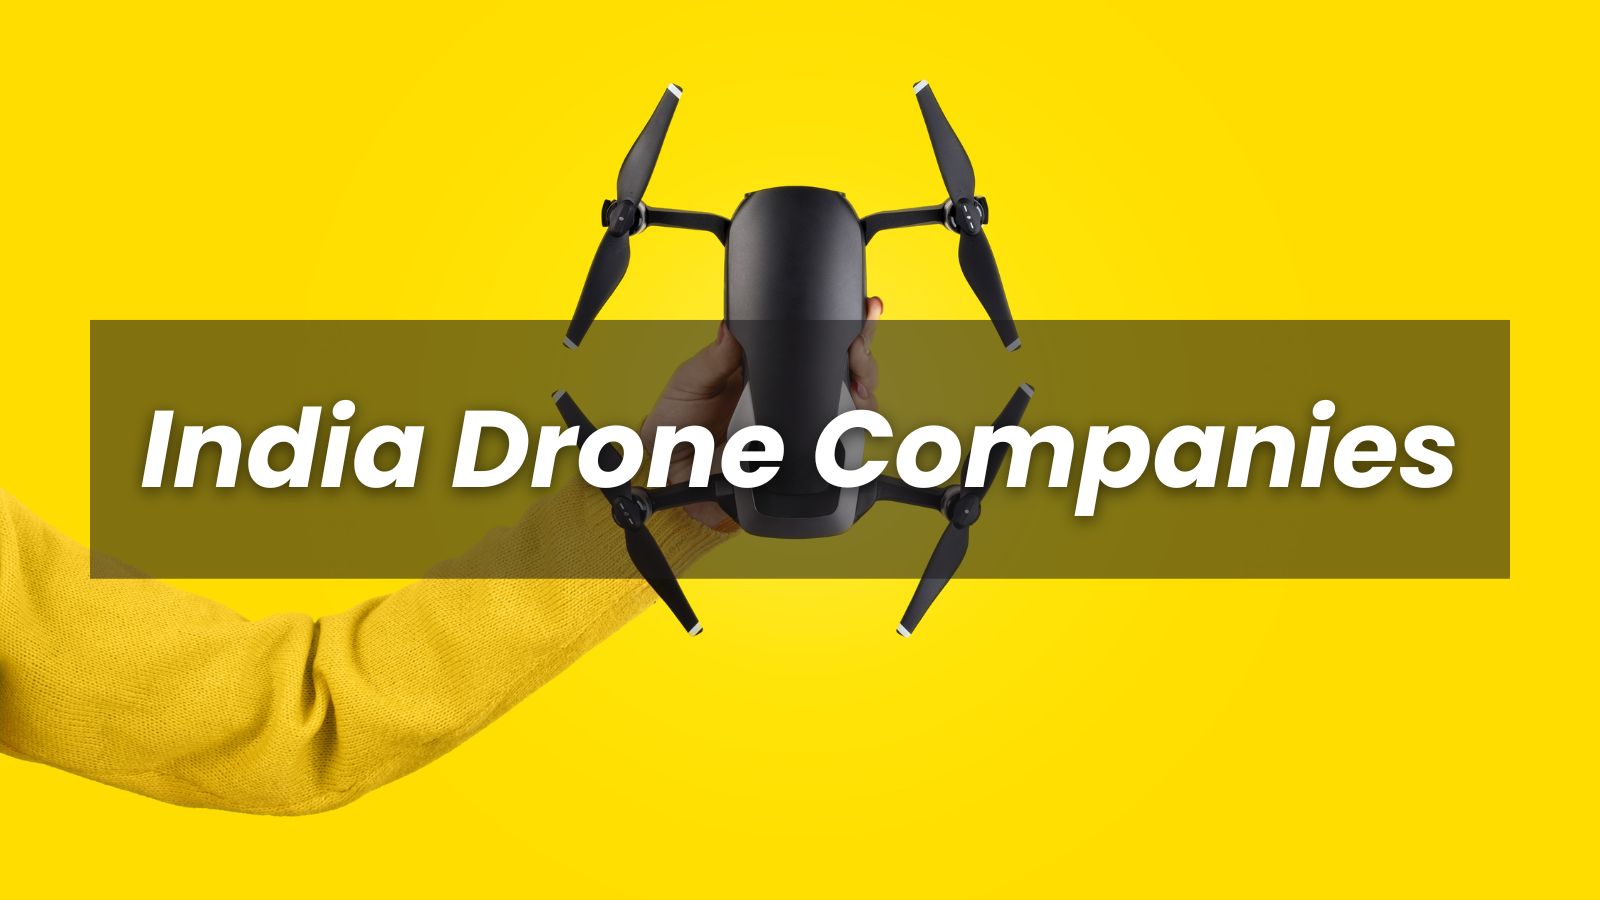 Agri Drone Companies in India